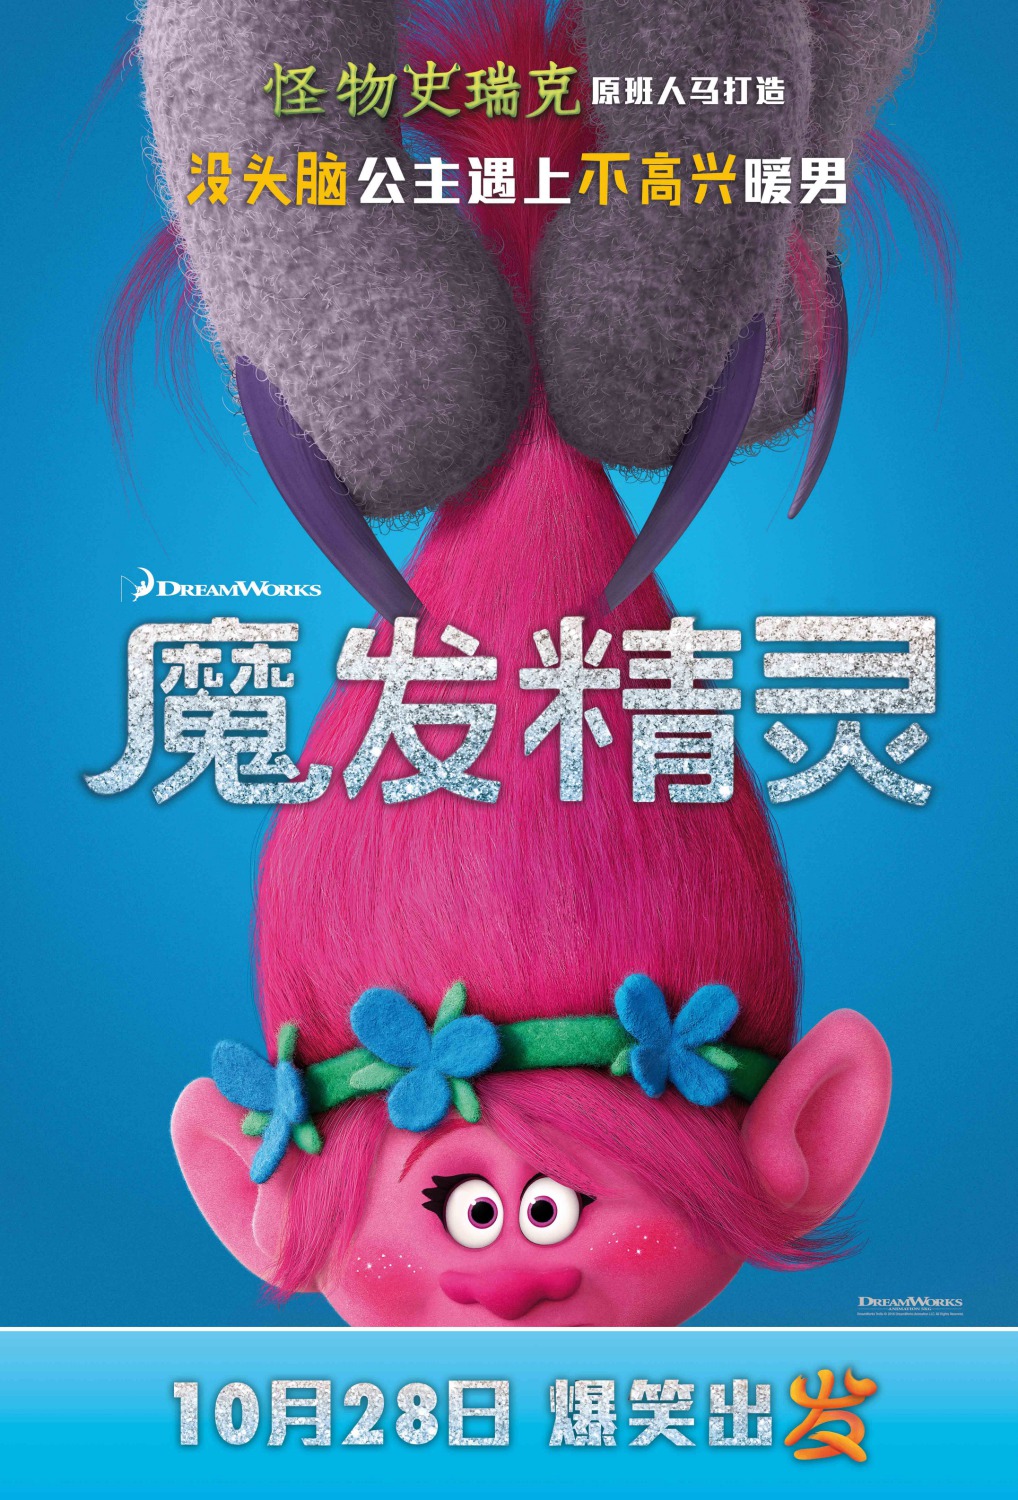 Extra Large Movie Poster Image for Trolls (#14 of 20)